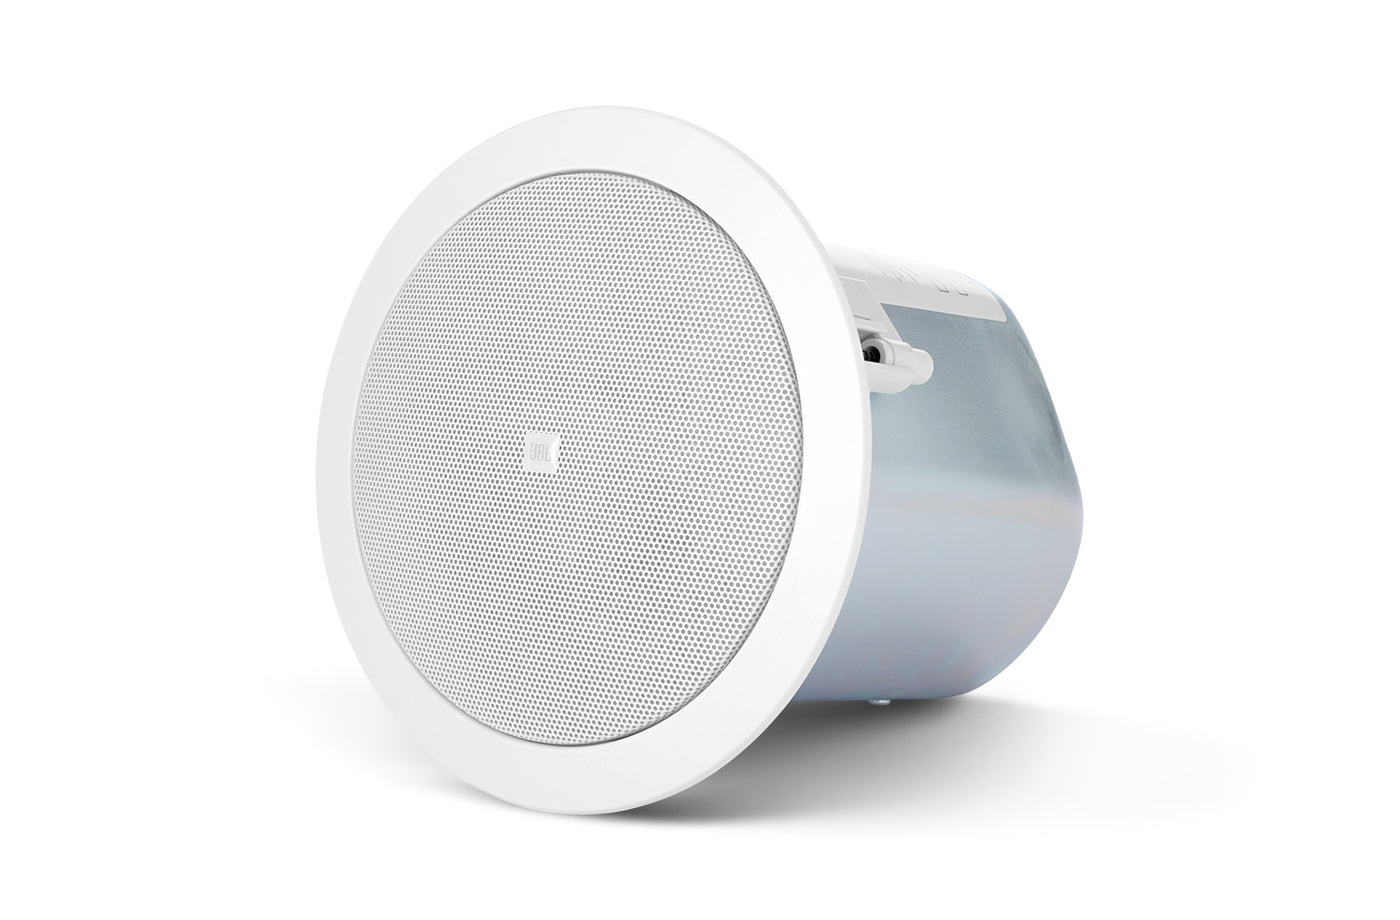 JBL Control 24CT Background/Foreground Ceiling Speaker